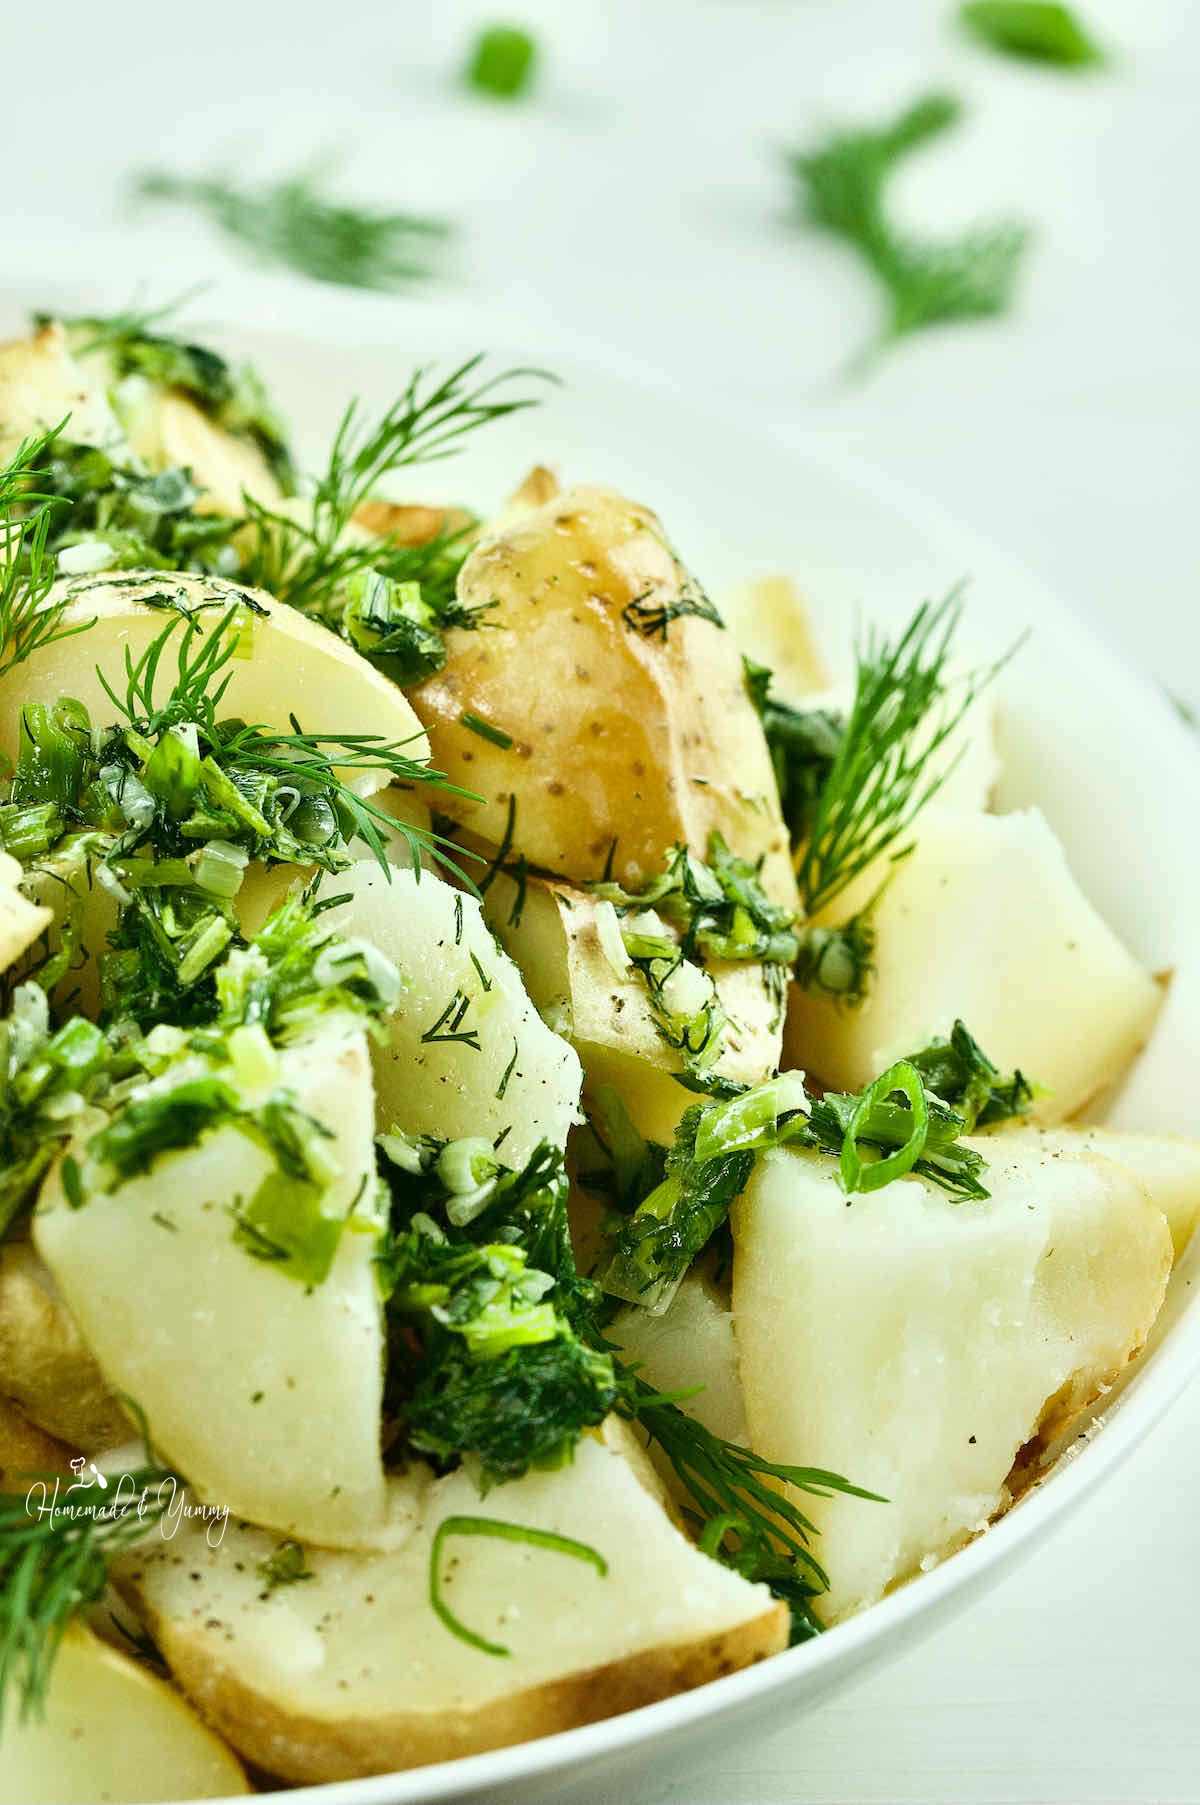 Ukrainian green onion and dill potatoes in a serving bowl.